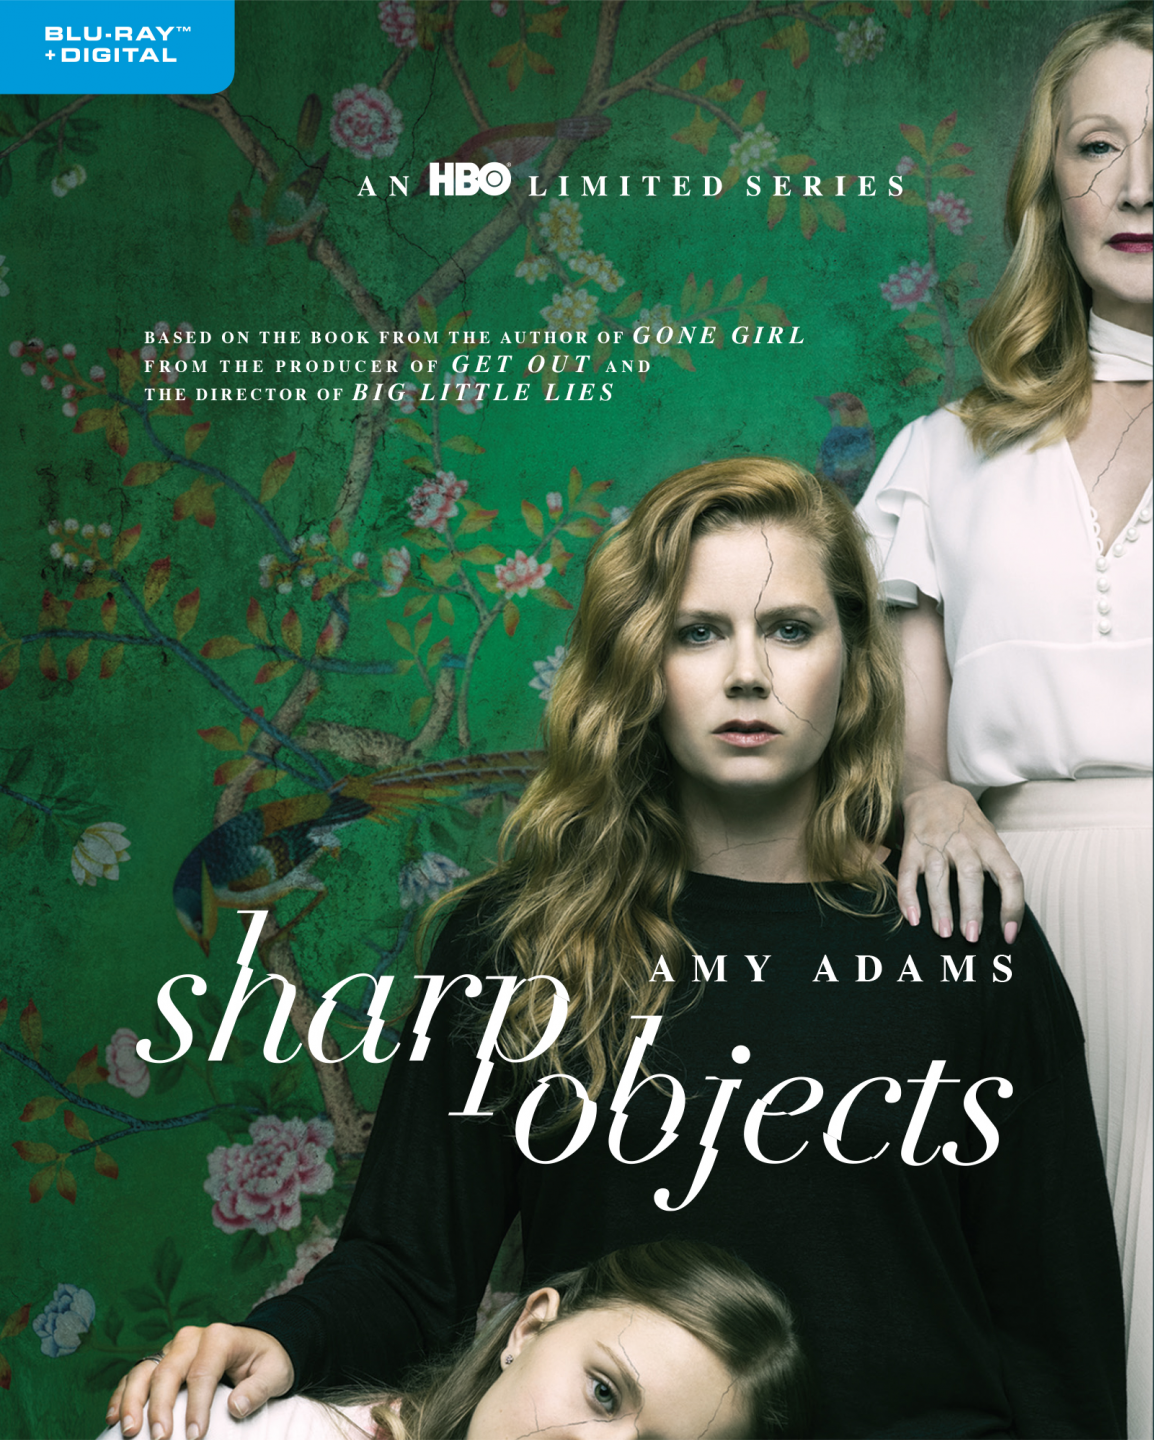 Sharp Objects Blu-Ray cover (HBO)